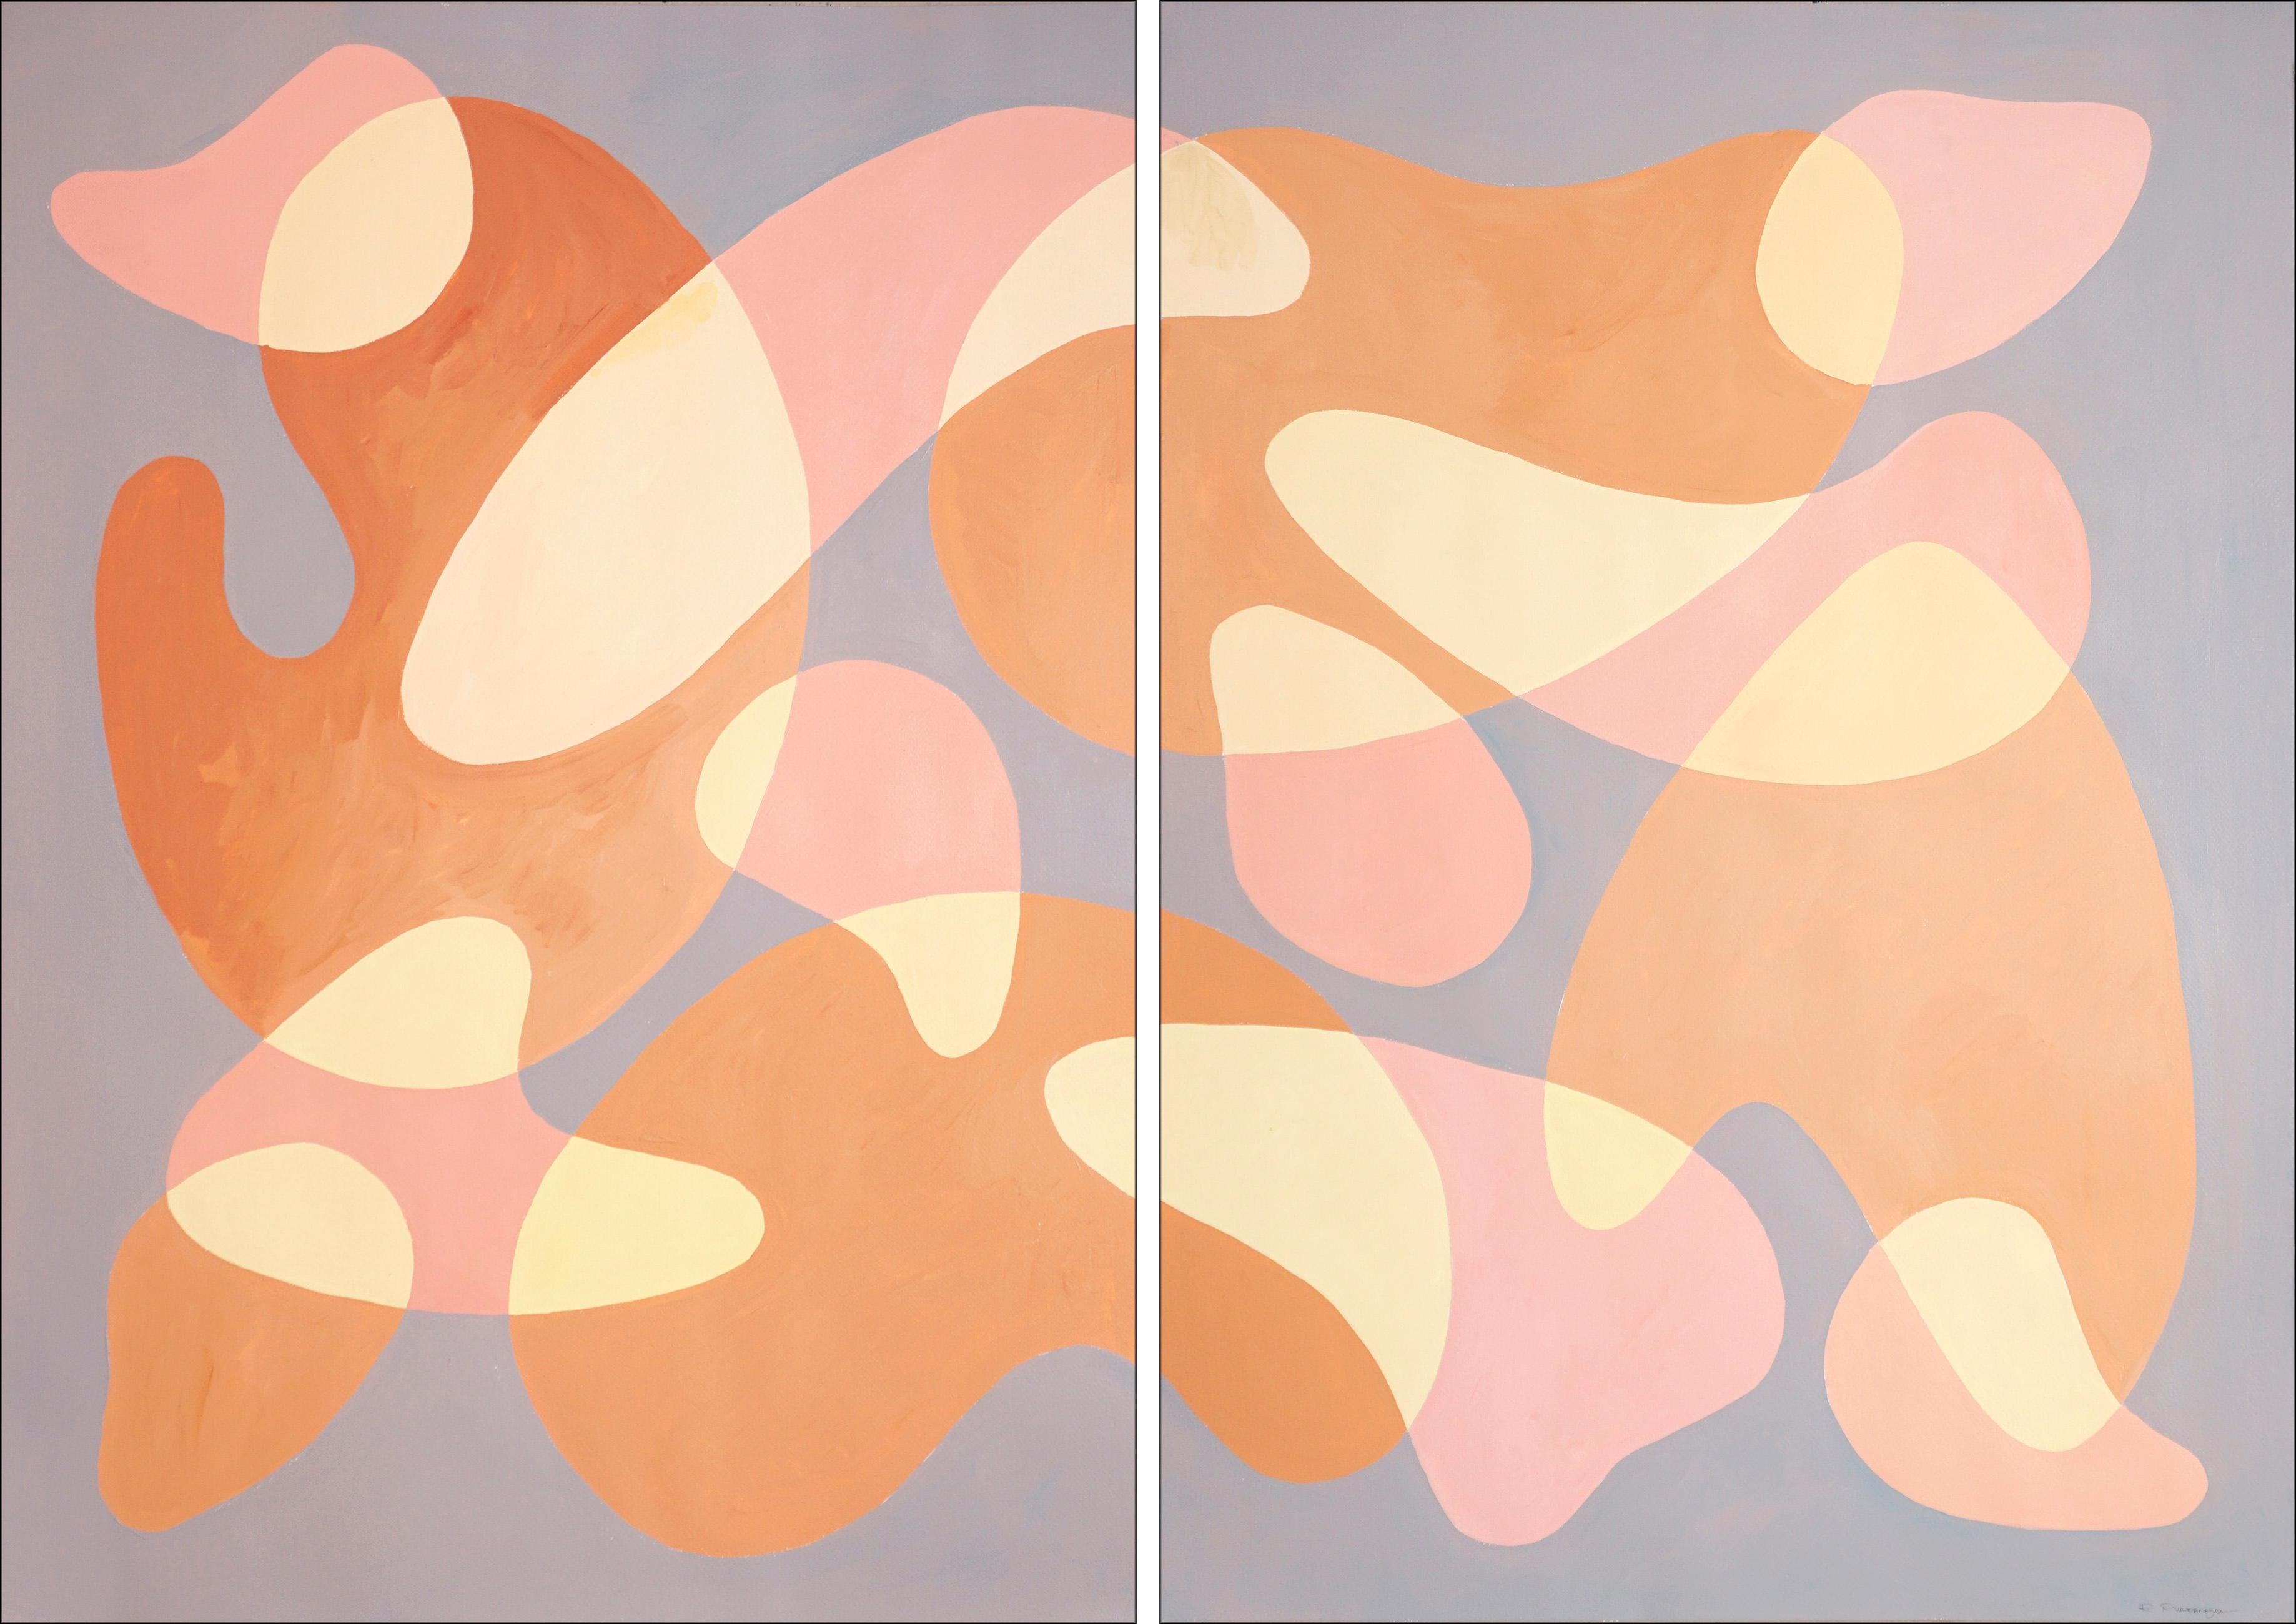 Ryan Rivadeneyra Abstract Painting - Dancing Bodies in a Dark Room, Nude Tones Diptych, Pale Pink Gray Organic Shapes